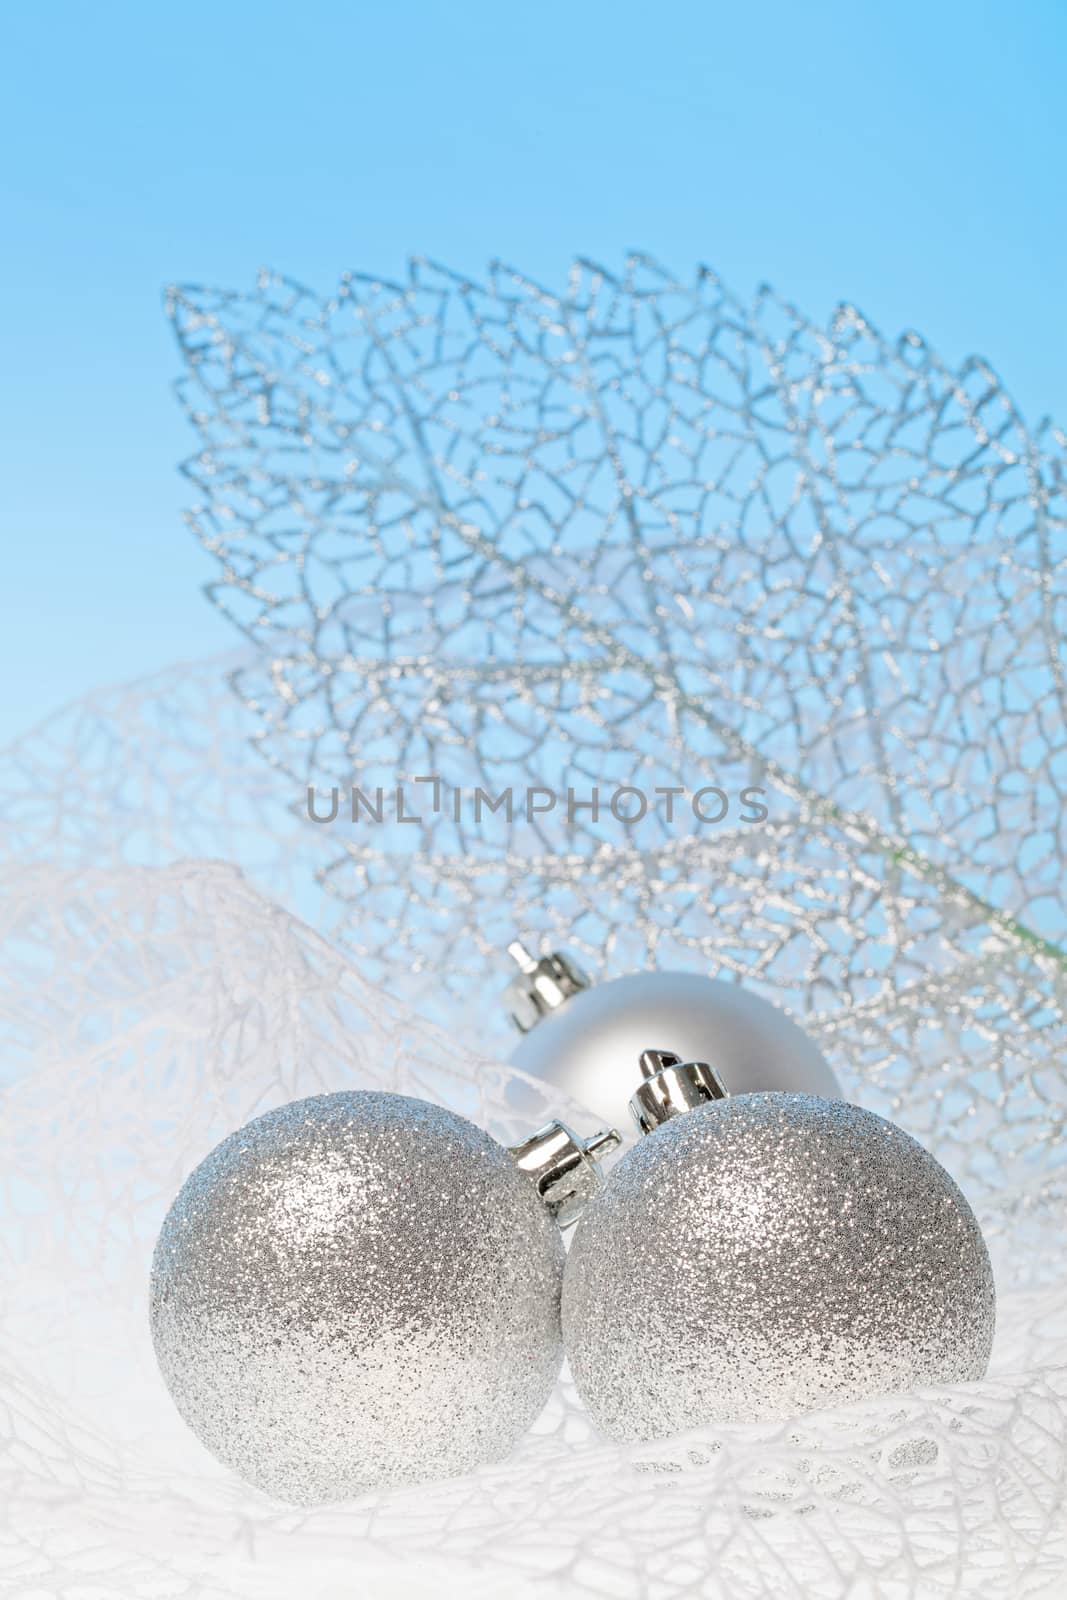 New Year background with three silver glass toys